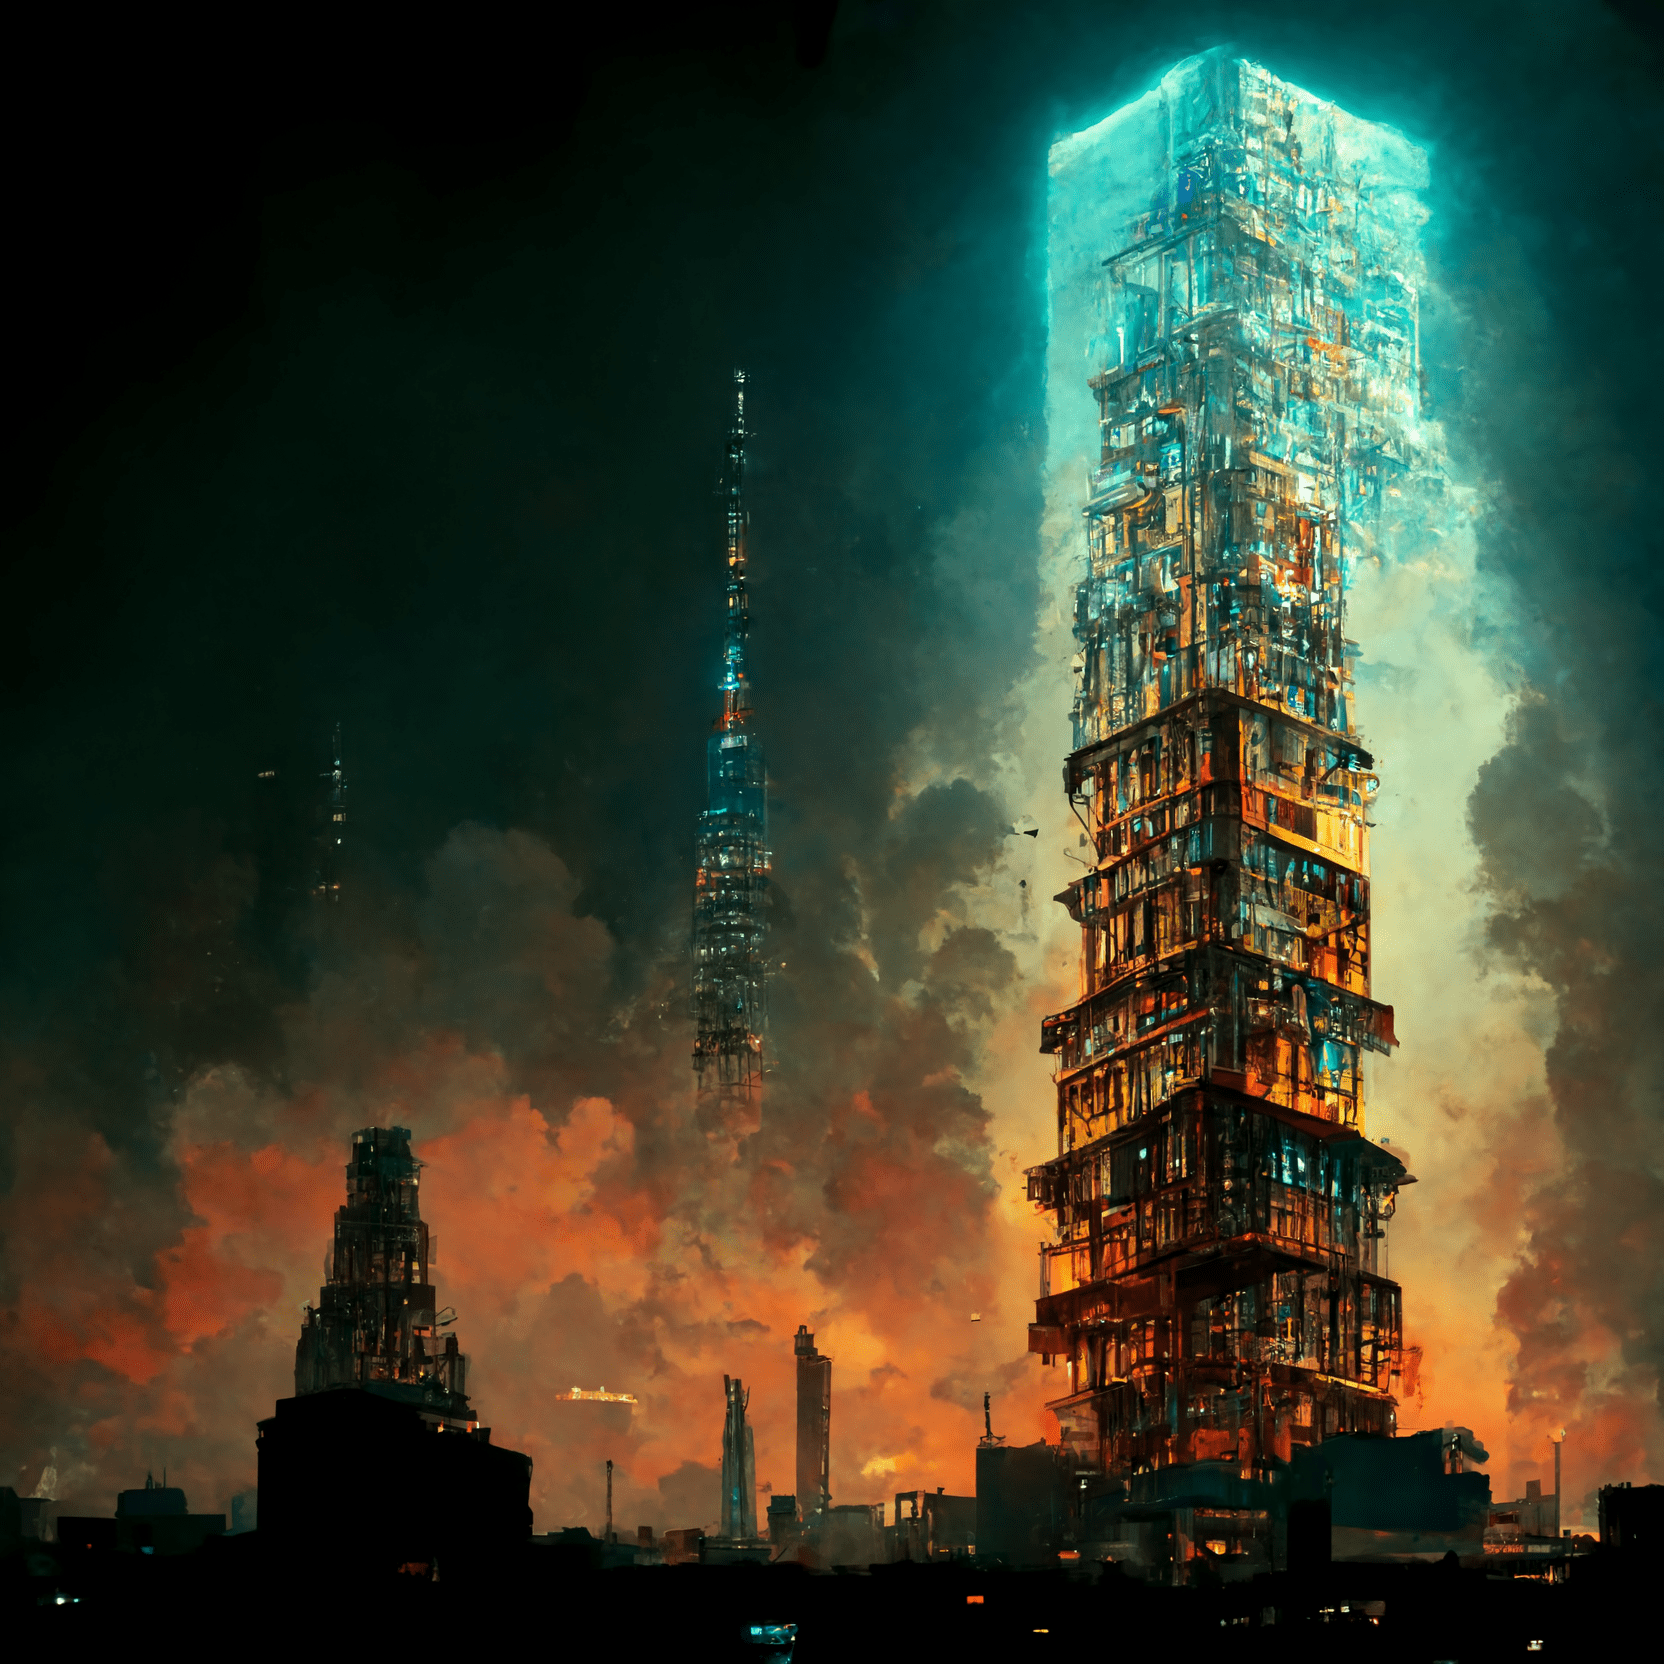 MikeSC_cyberpunk_tower_of_babel_bccf662d-a3bd-4db9-830f-0354647db1ed